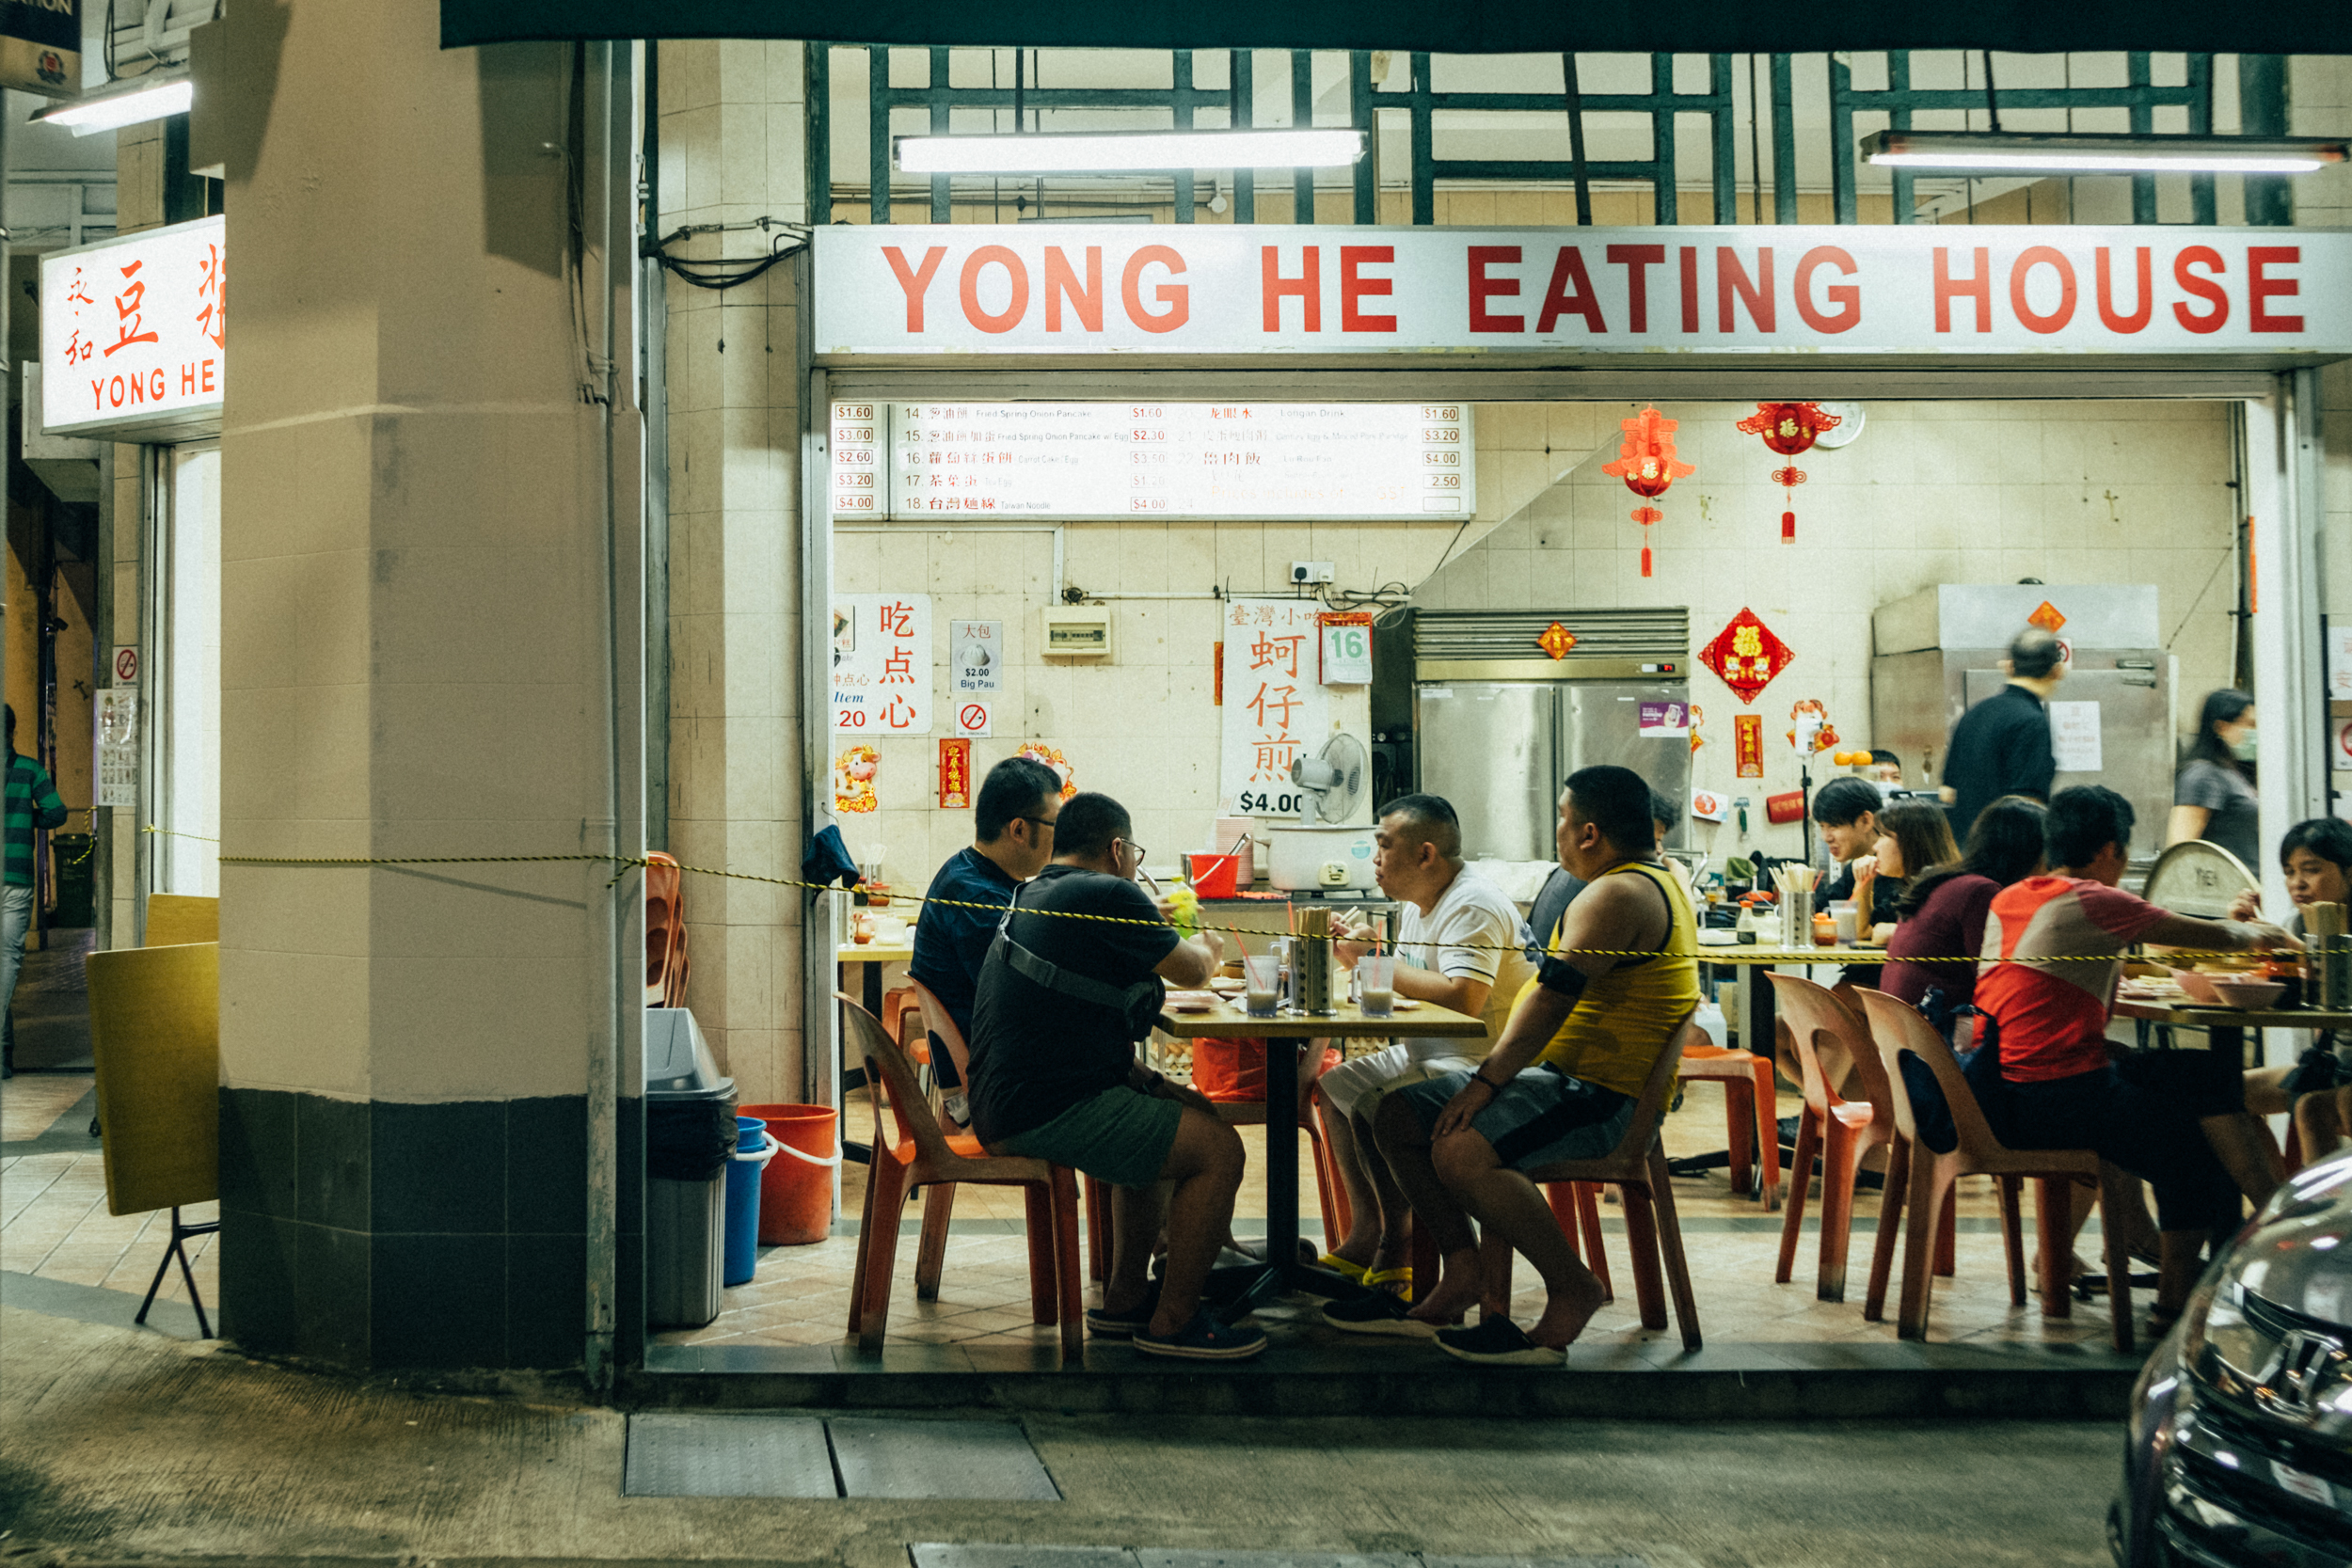 Image of people sitting at an eatery in Geylang